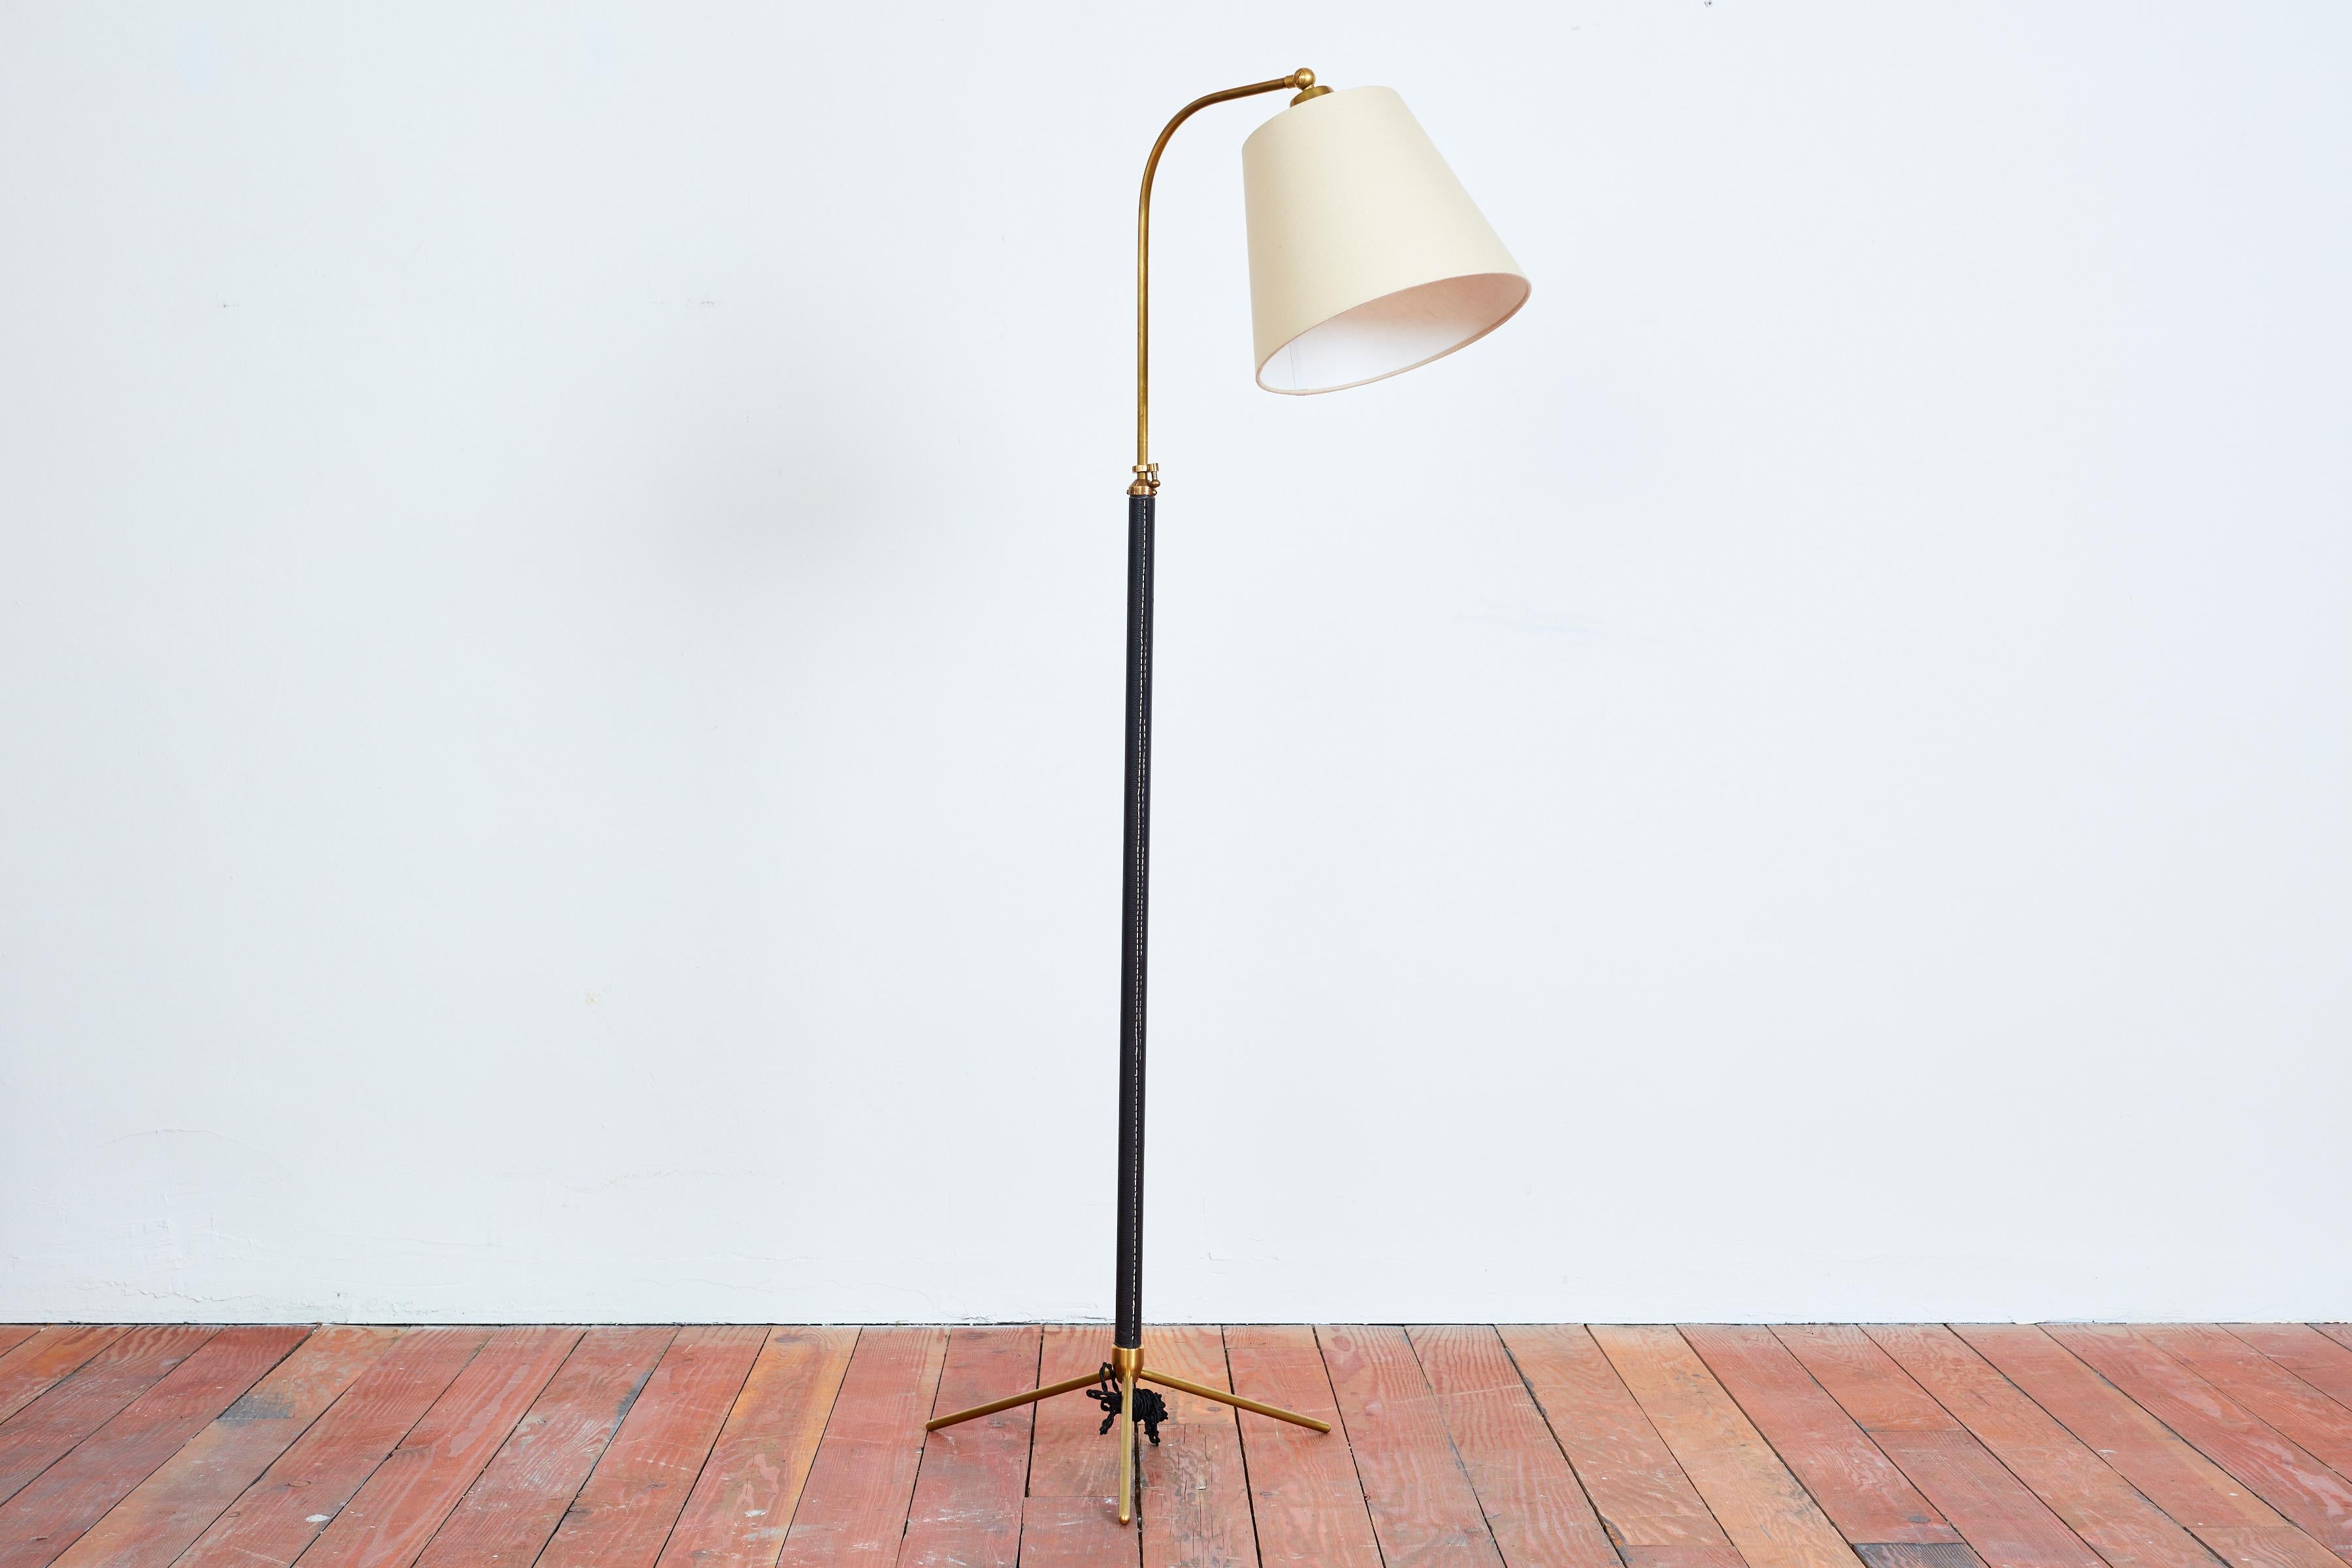 Handsome French floor lamp attributed to Jacques Adnet with hand-stitched black leather, contrast stitching, brass tripod base and new silk shade. 
Newly rewired. 
Height extends from 48” - 64.5”.